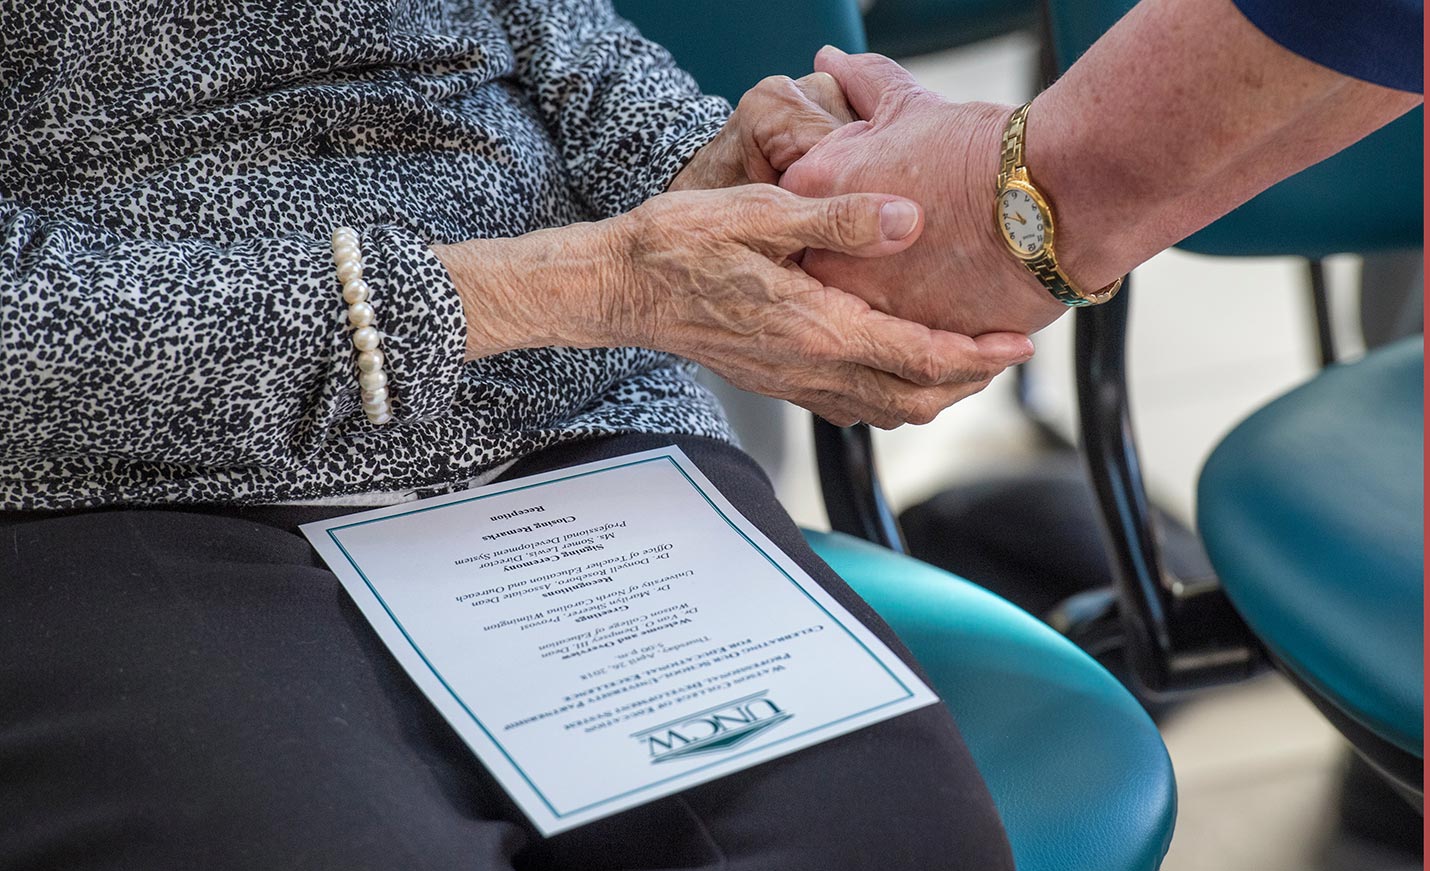 A close up of the hands of two older adults as they hold hands.